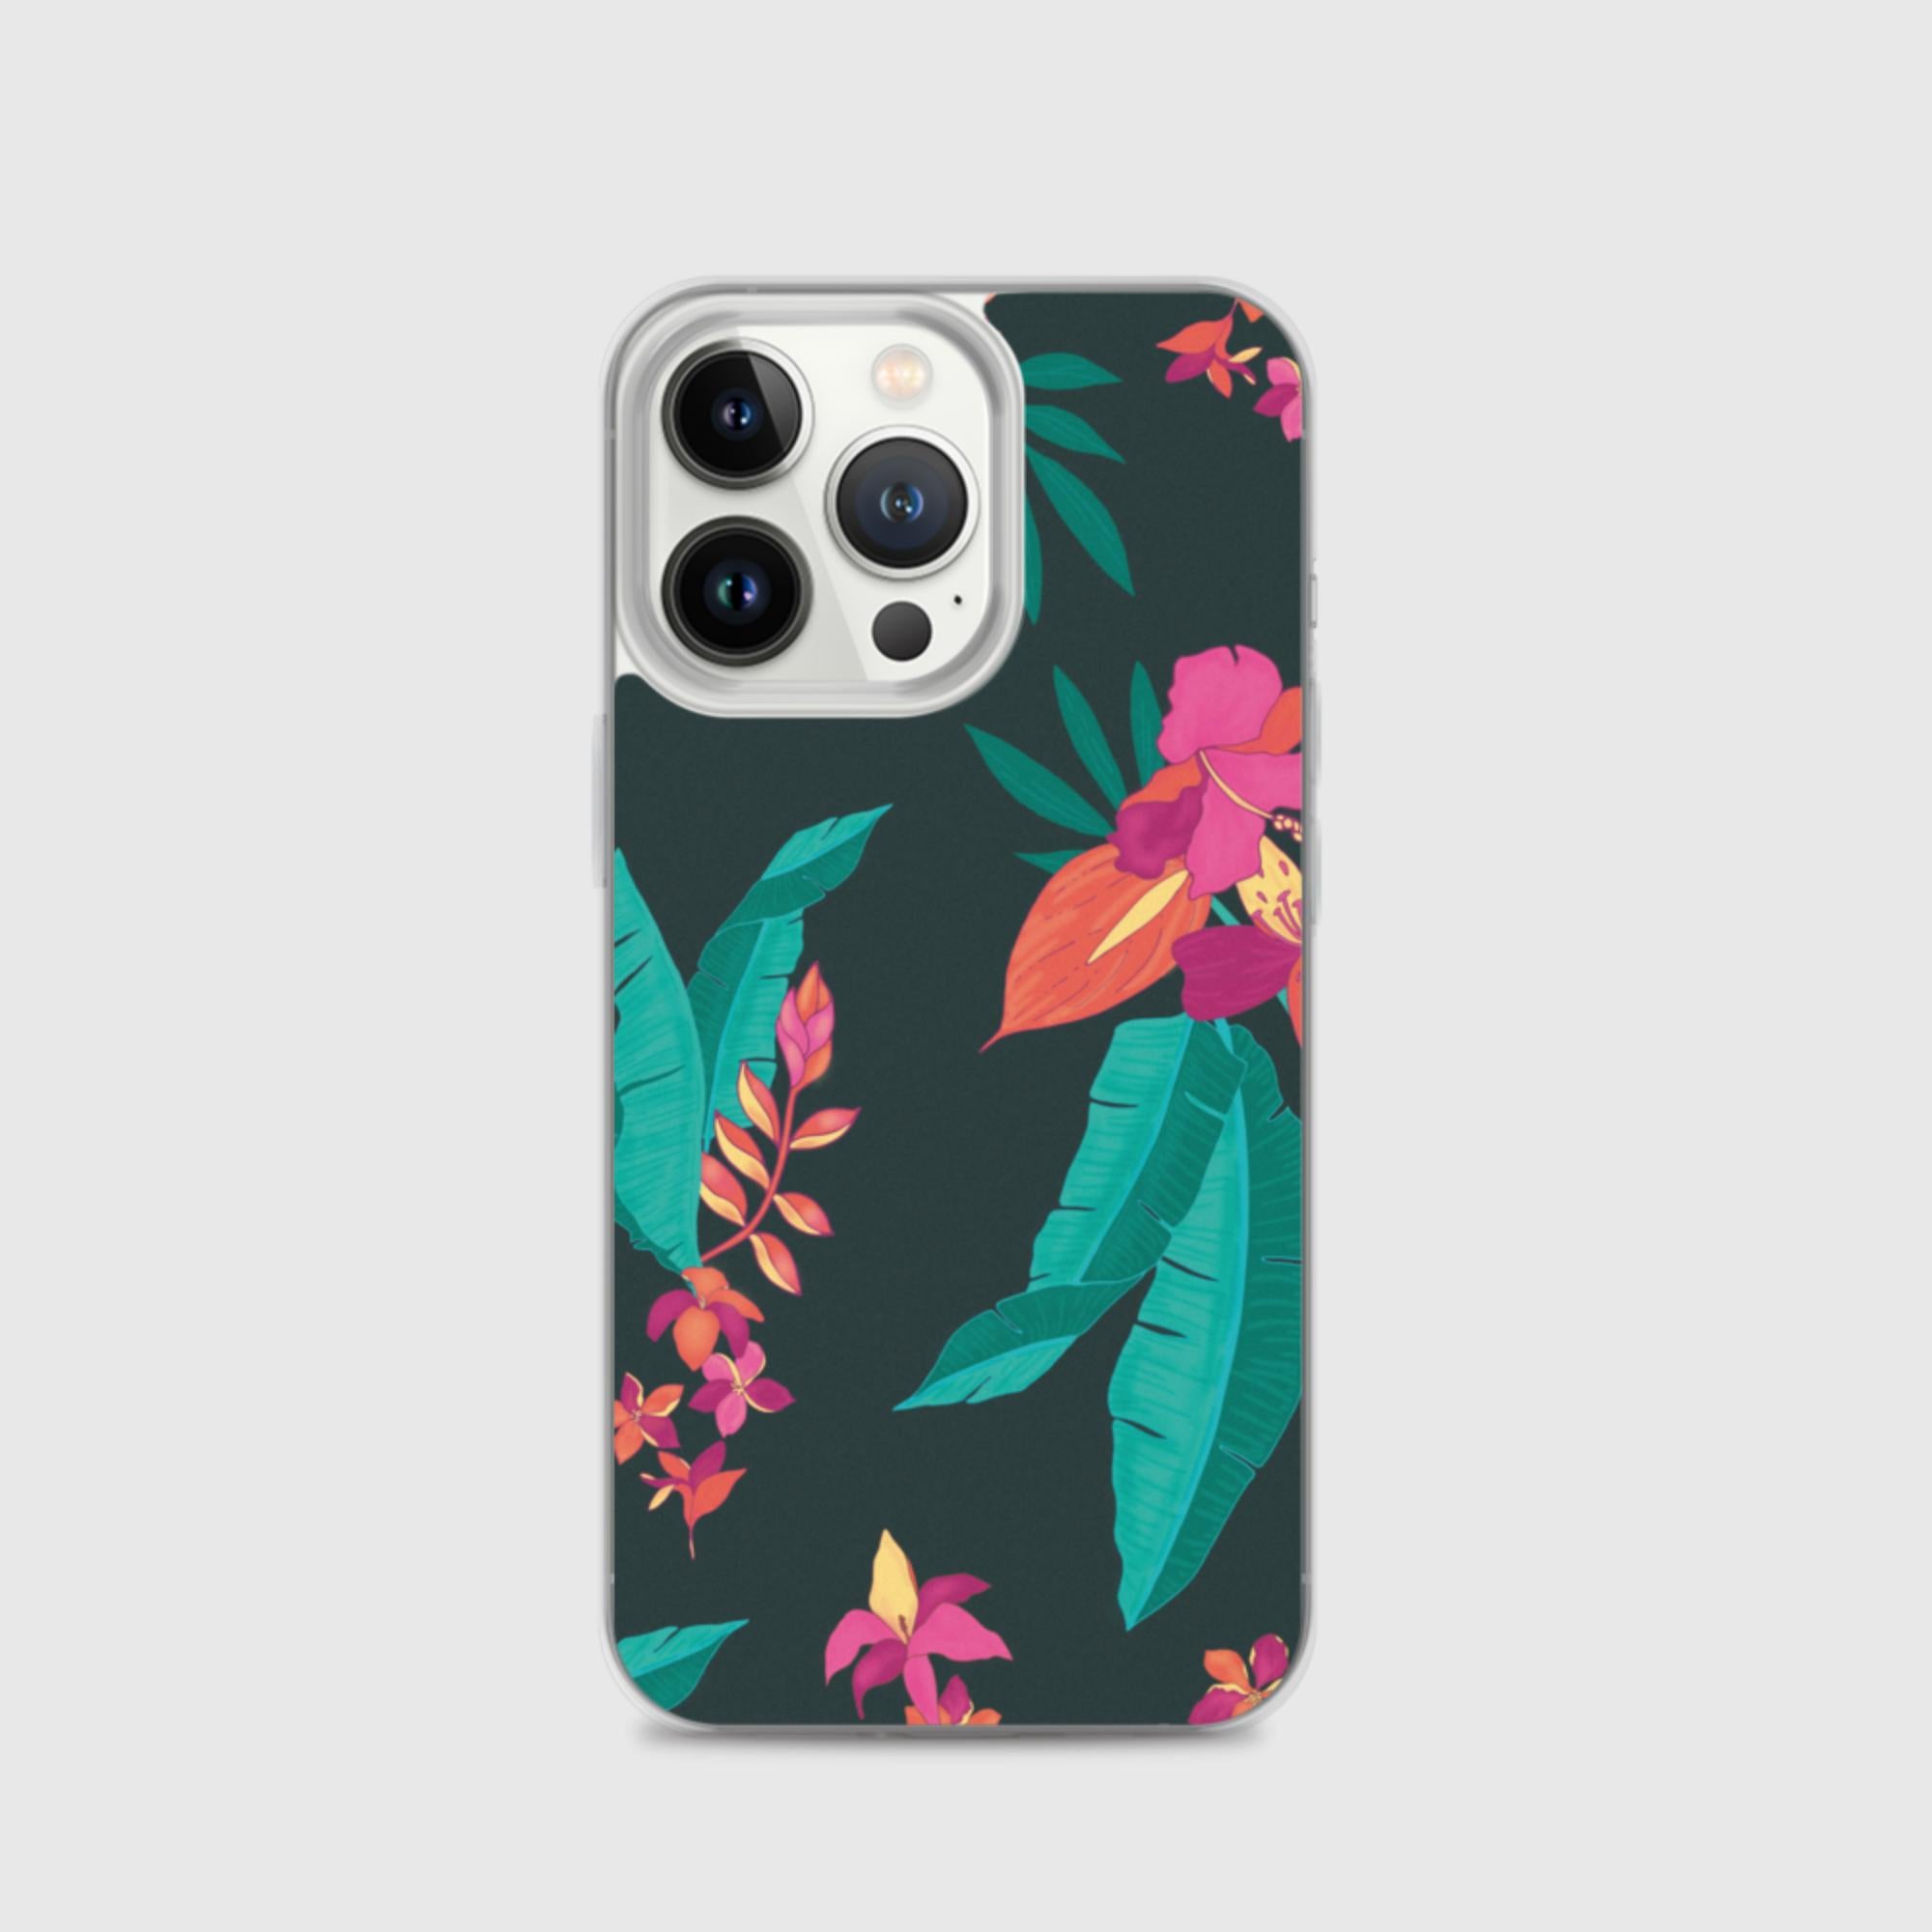 iPhone Case - Floral - Sunset Harbor Clothing